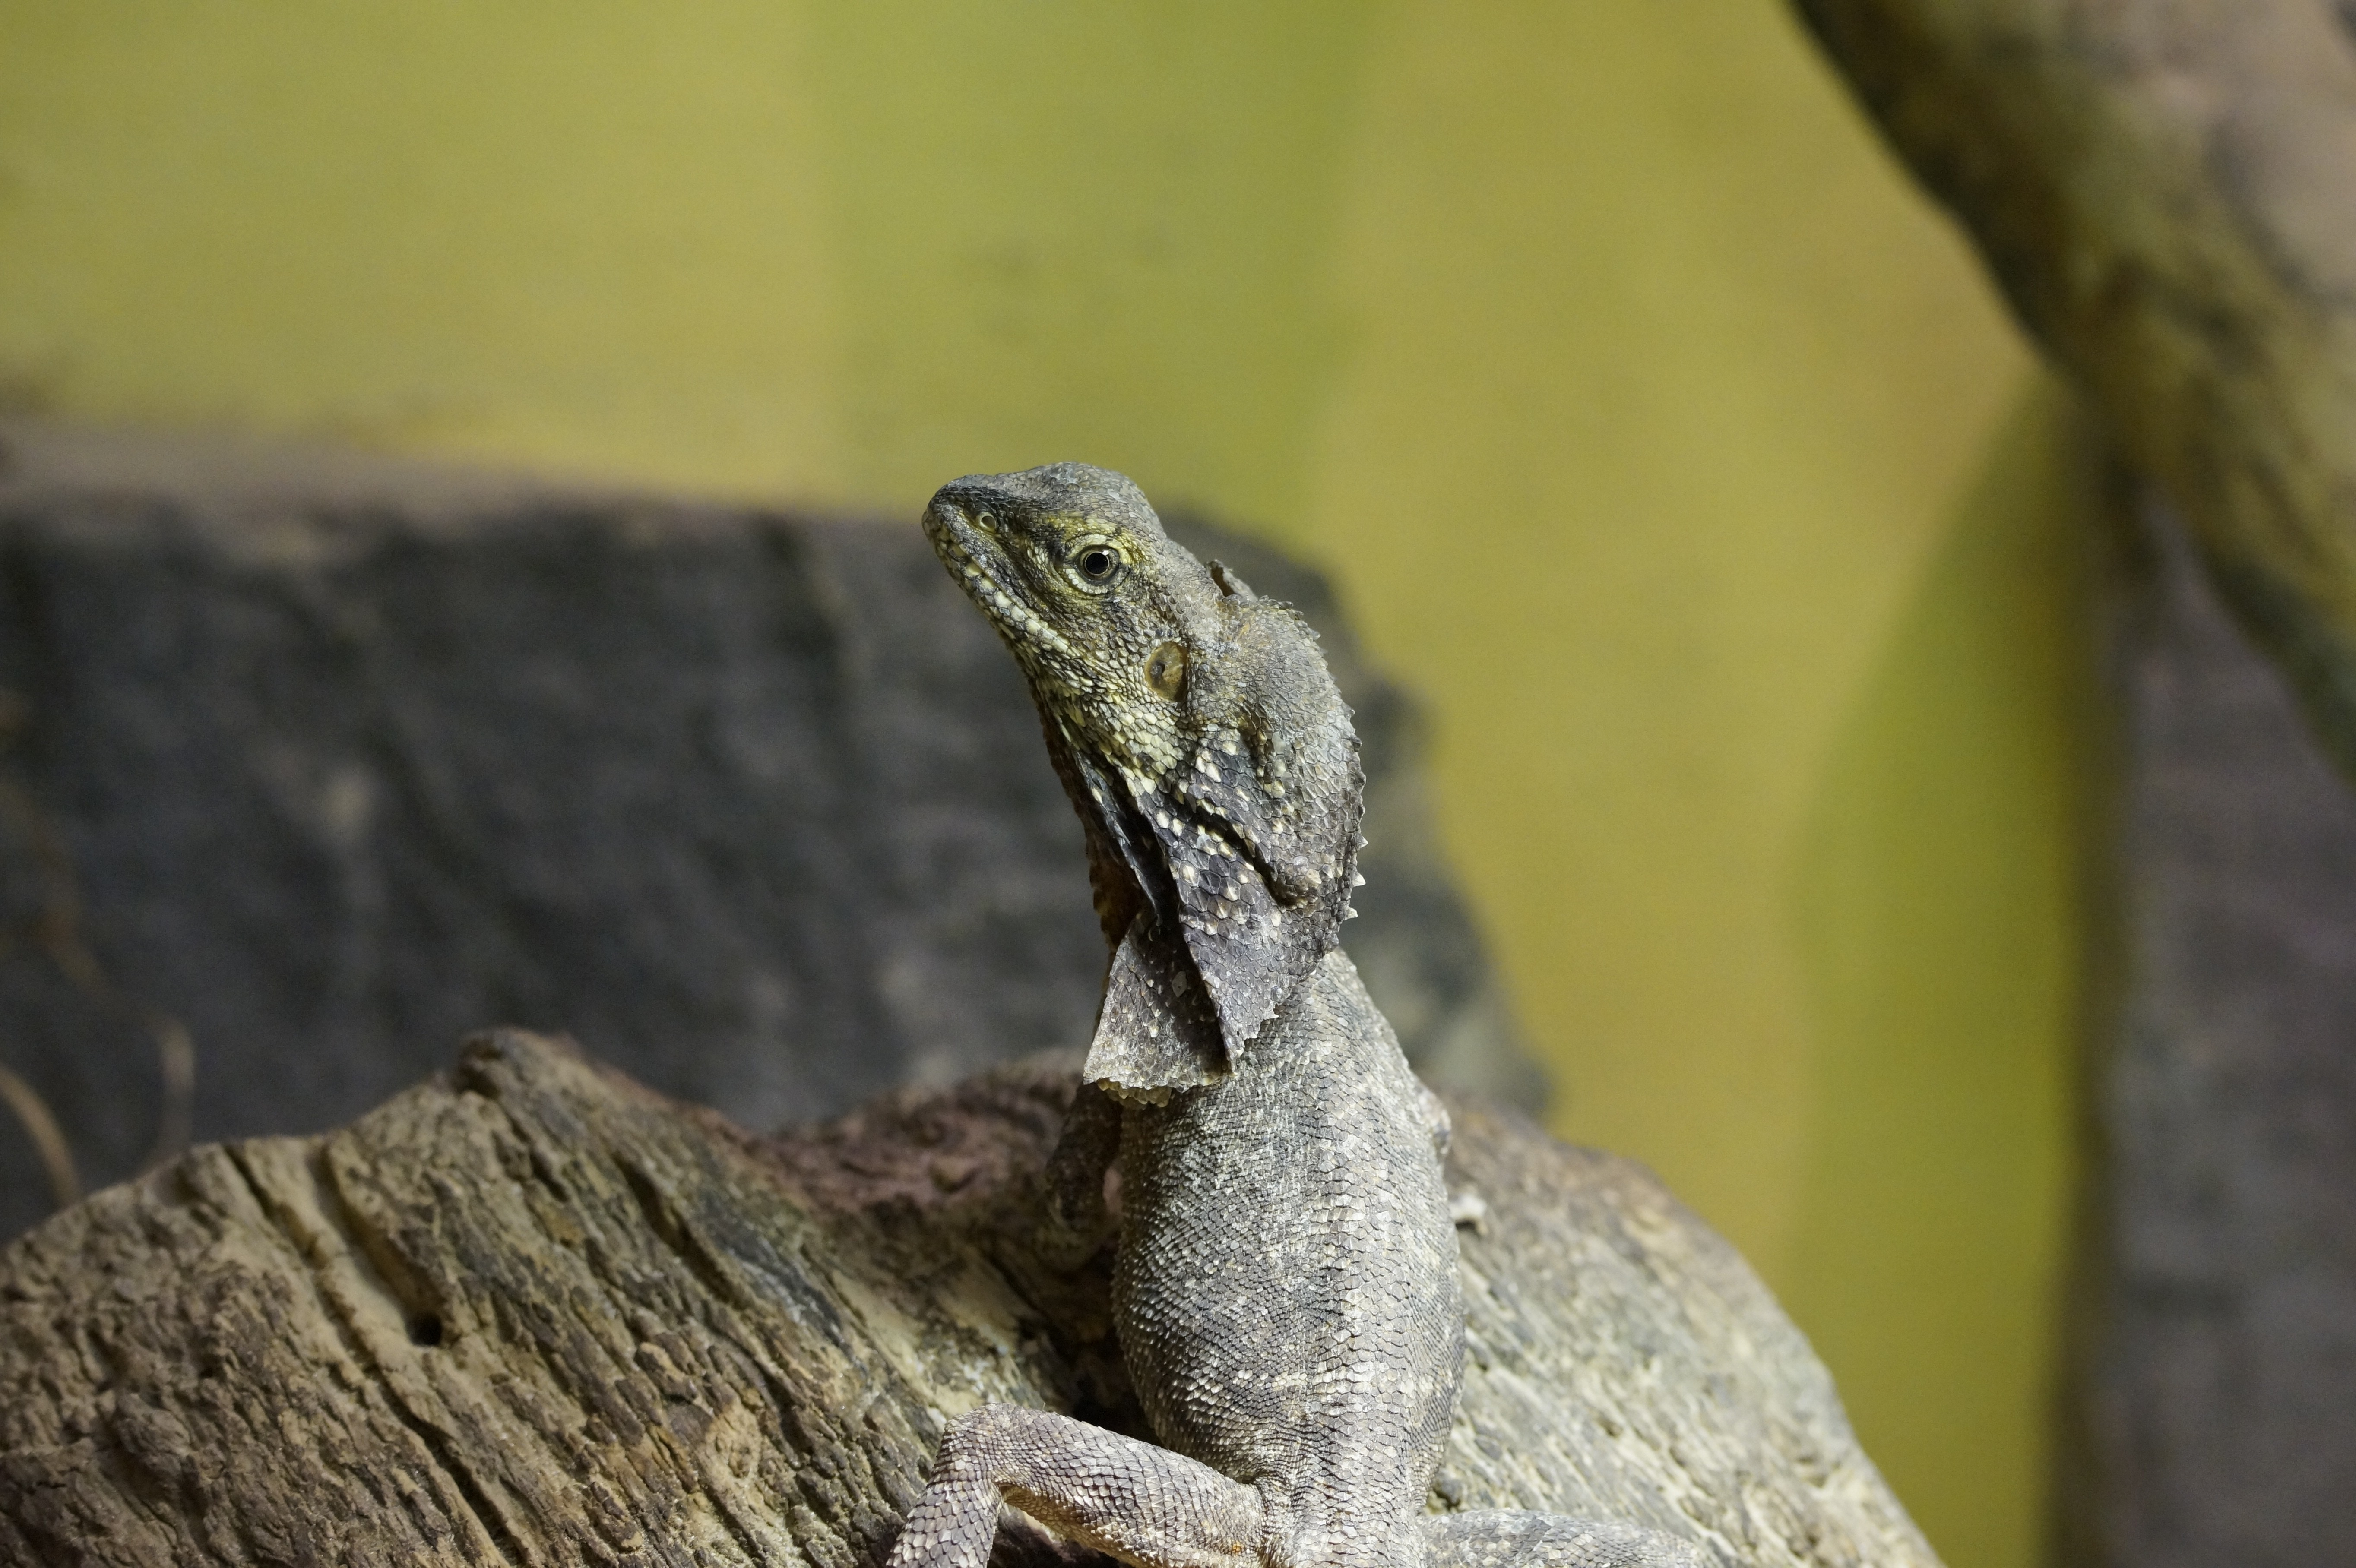 Frill Necked Lizard, Lizard, Reptile, one animal, animals in the wild